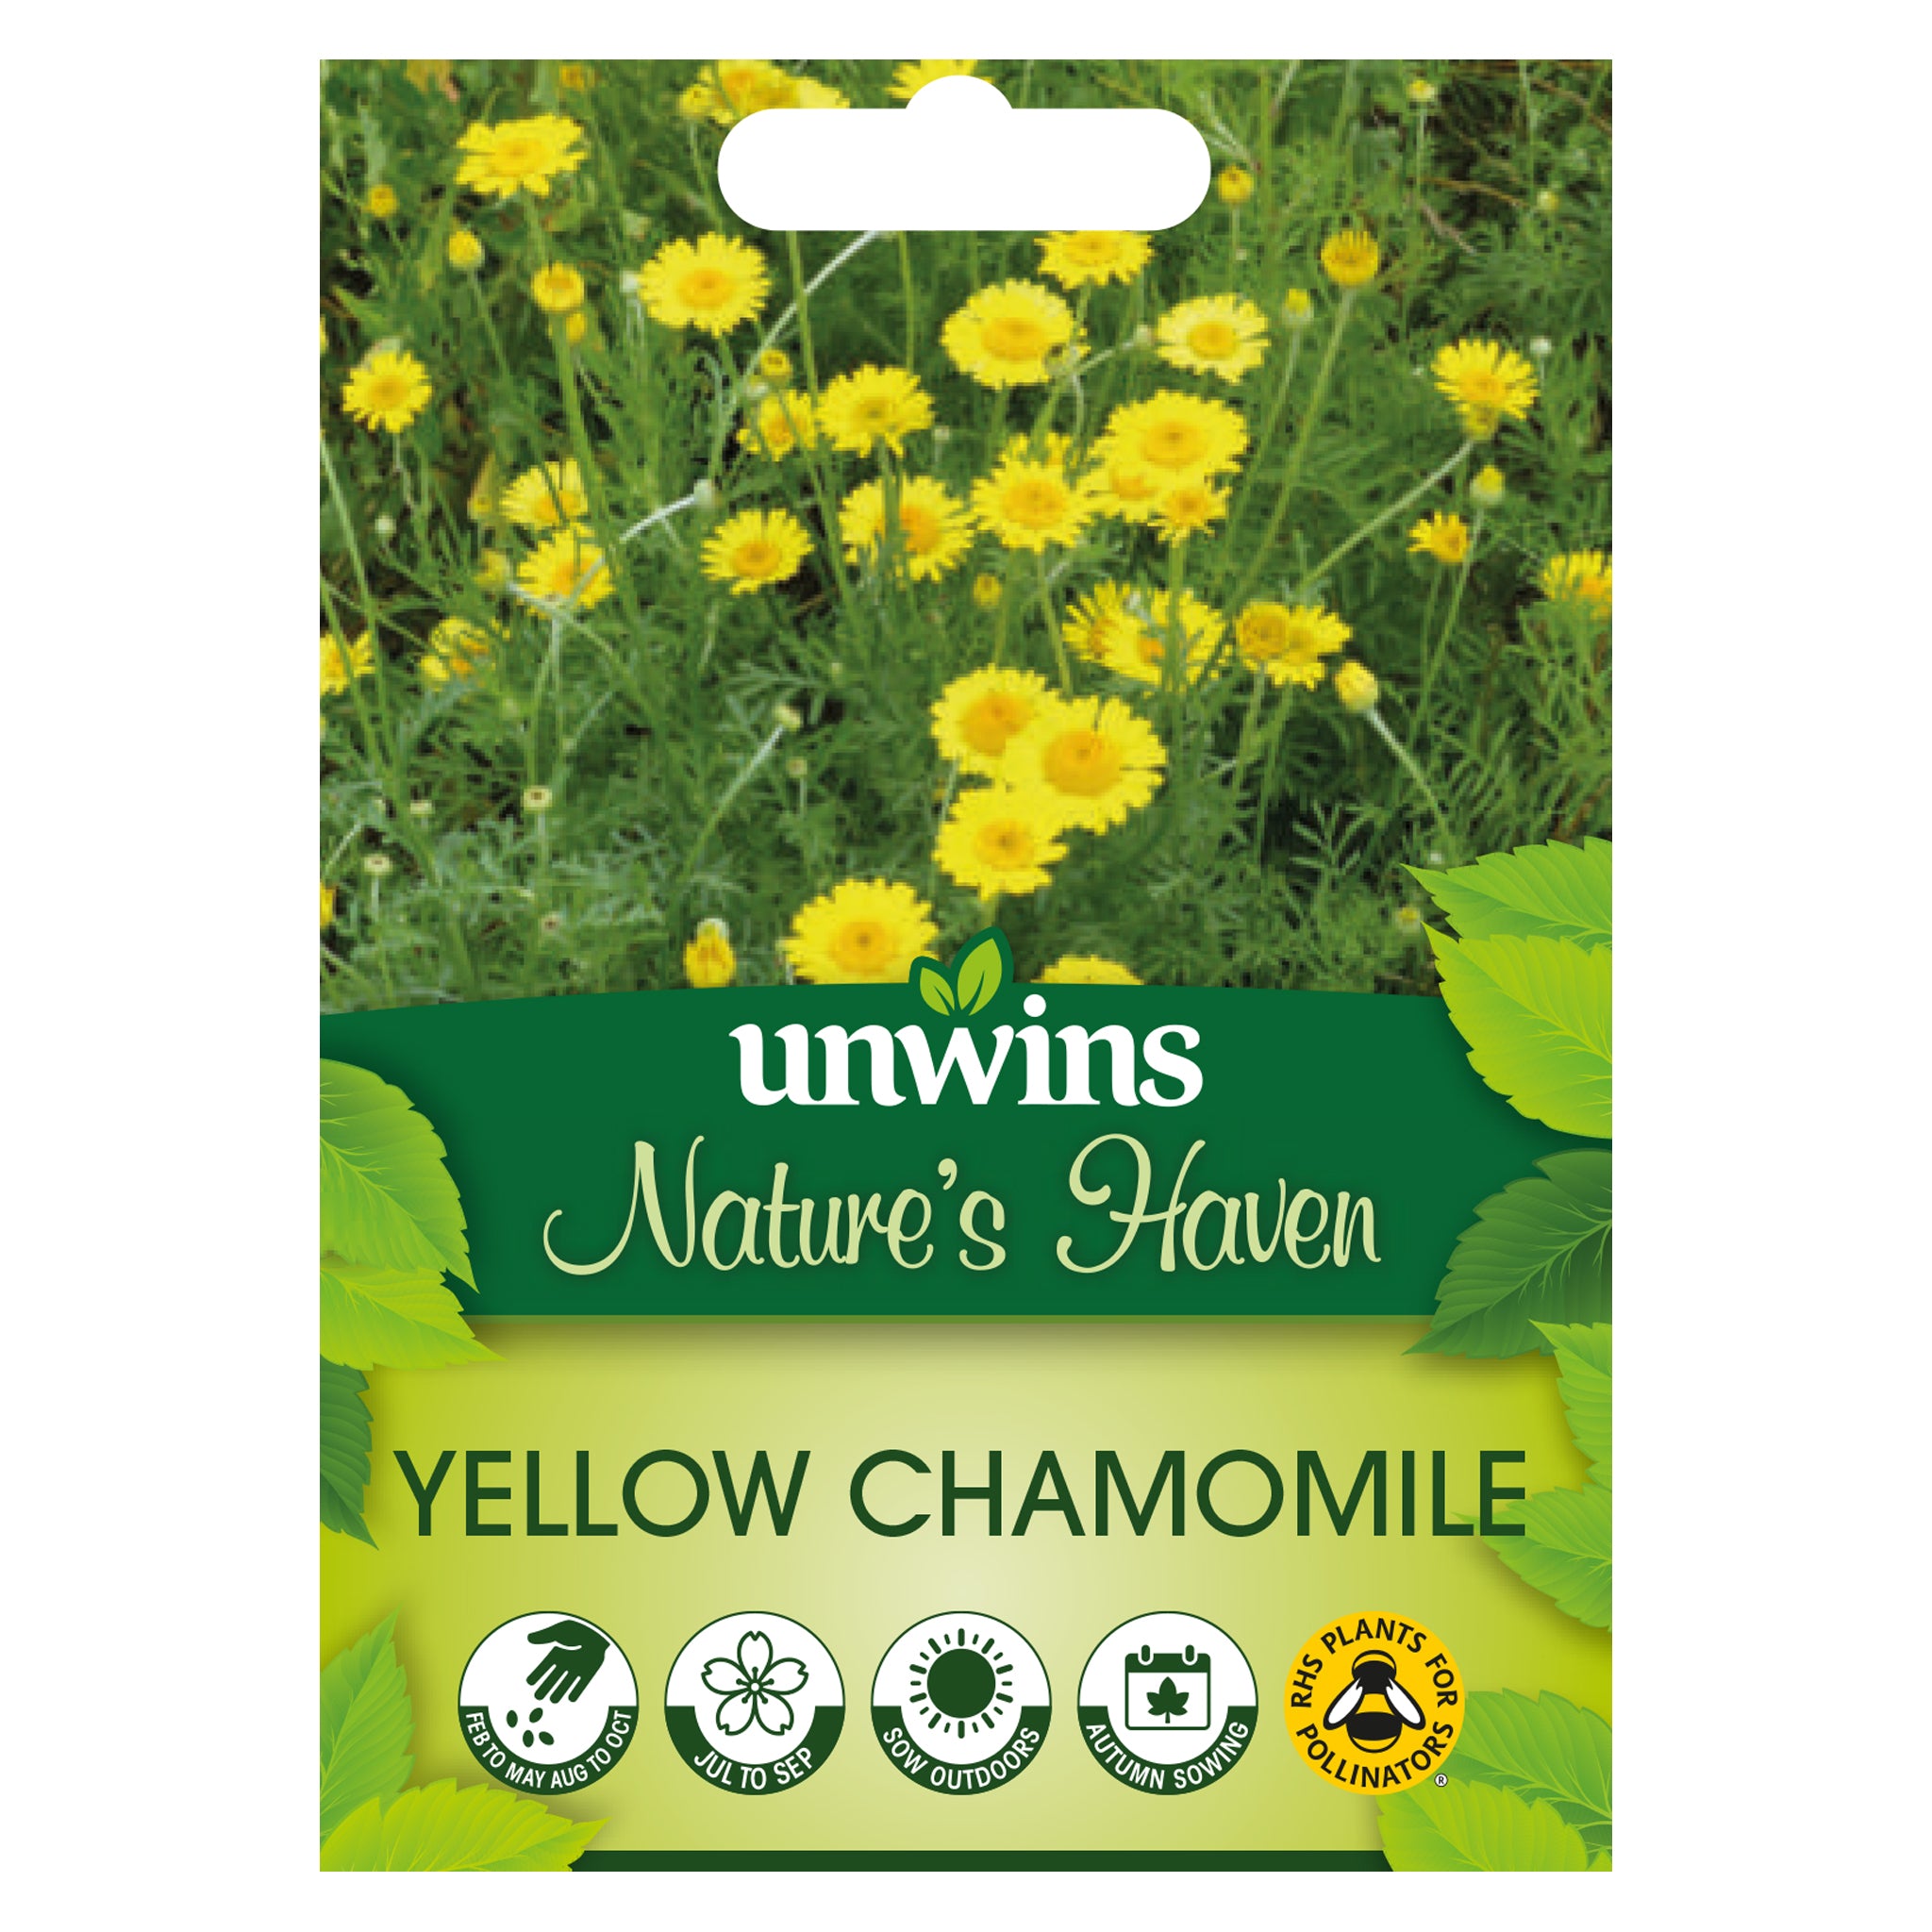 Nature's Haven Yellow Chamomile Seeds